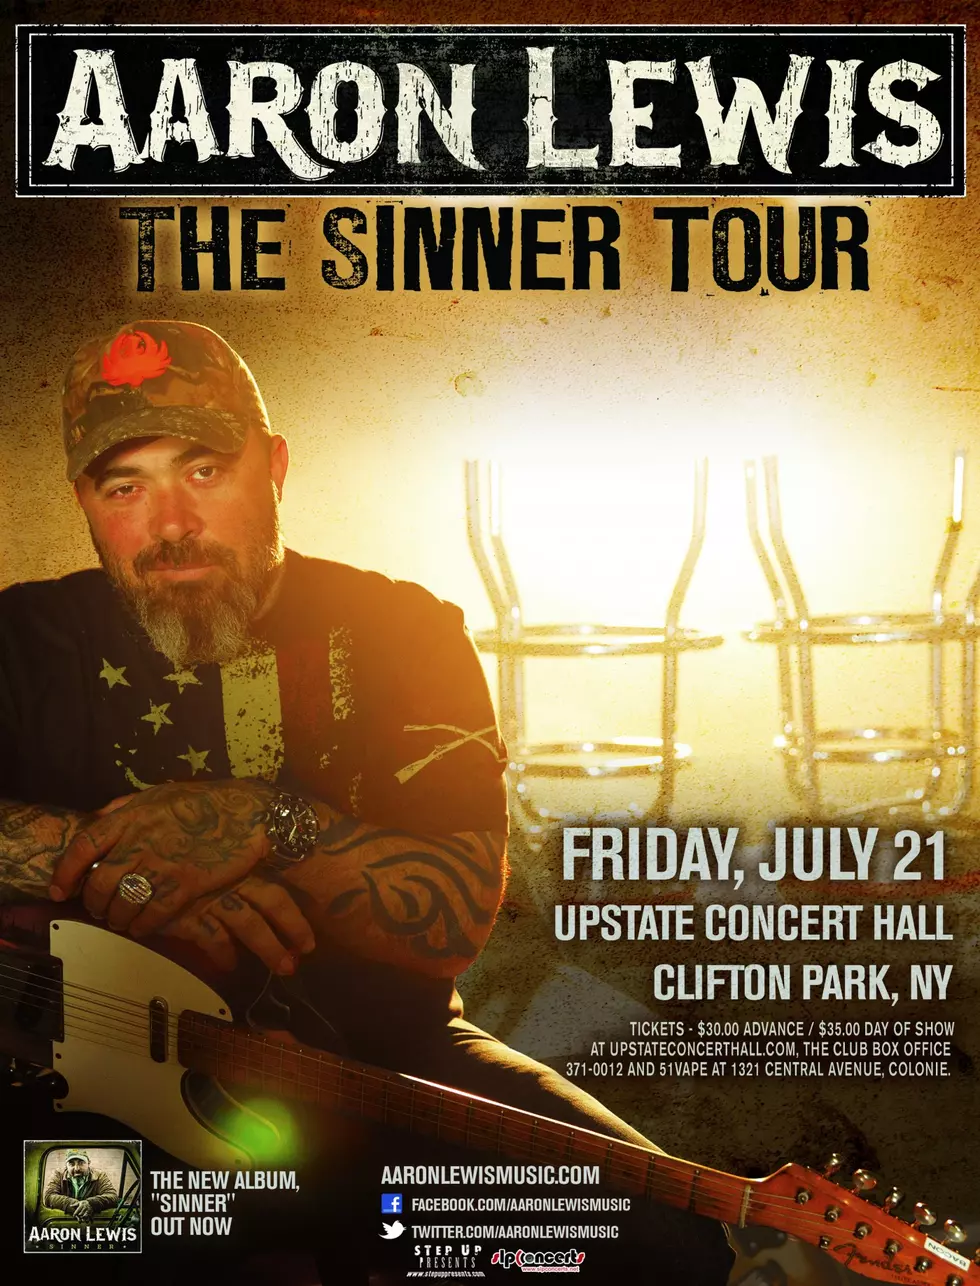 Aaron Lewis Returns to Play the Capital Region this Summer